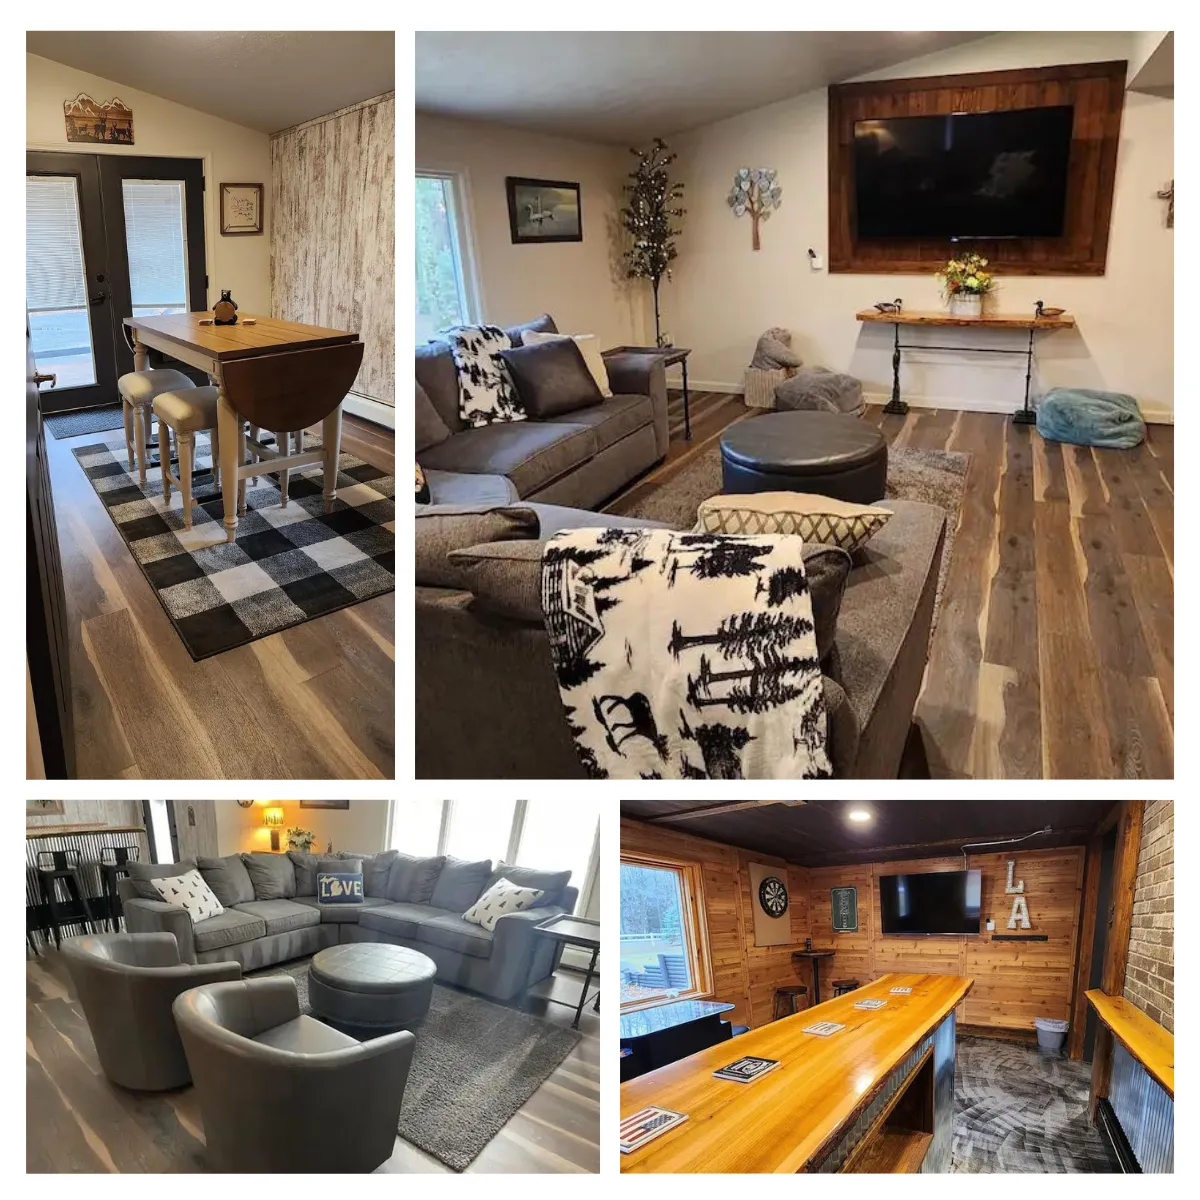 At Lake Ann Lodge, there are comfy spots for all. Relax on sectional couches in the main living areas or enjoy games in separate rooms. Teens have their movie and gaming spot, while kids can explore a secret fort. There's also a pub with a bar and games, plus TVs in every bedroom for private relaxation.